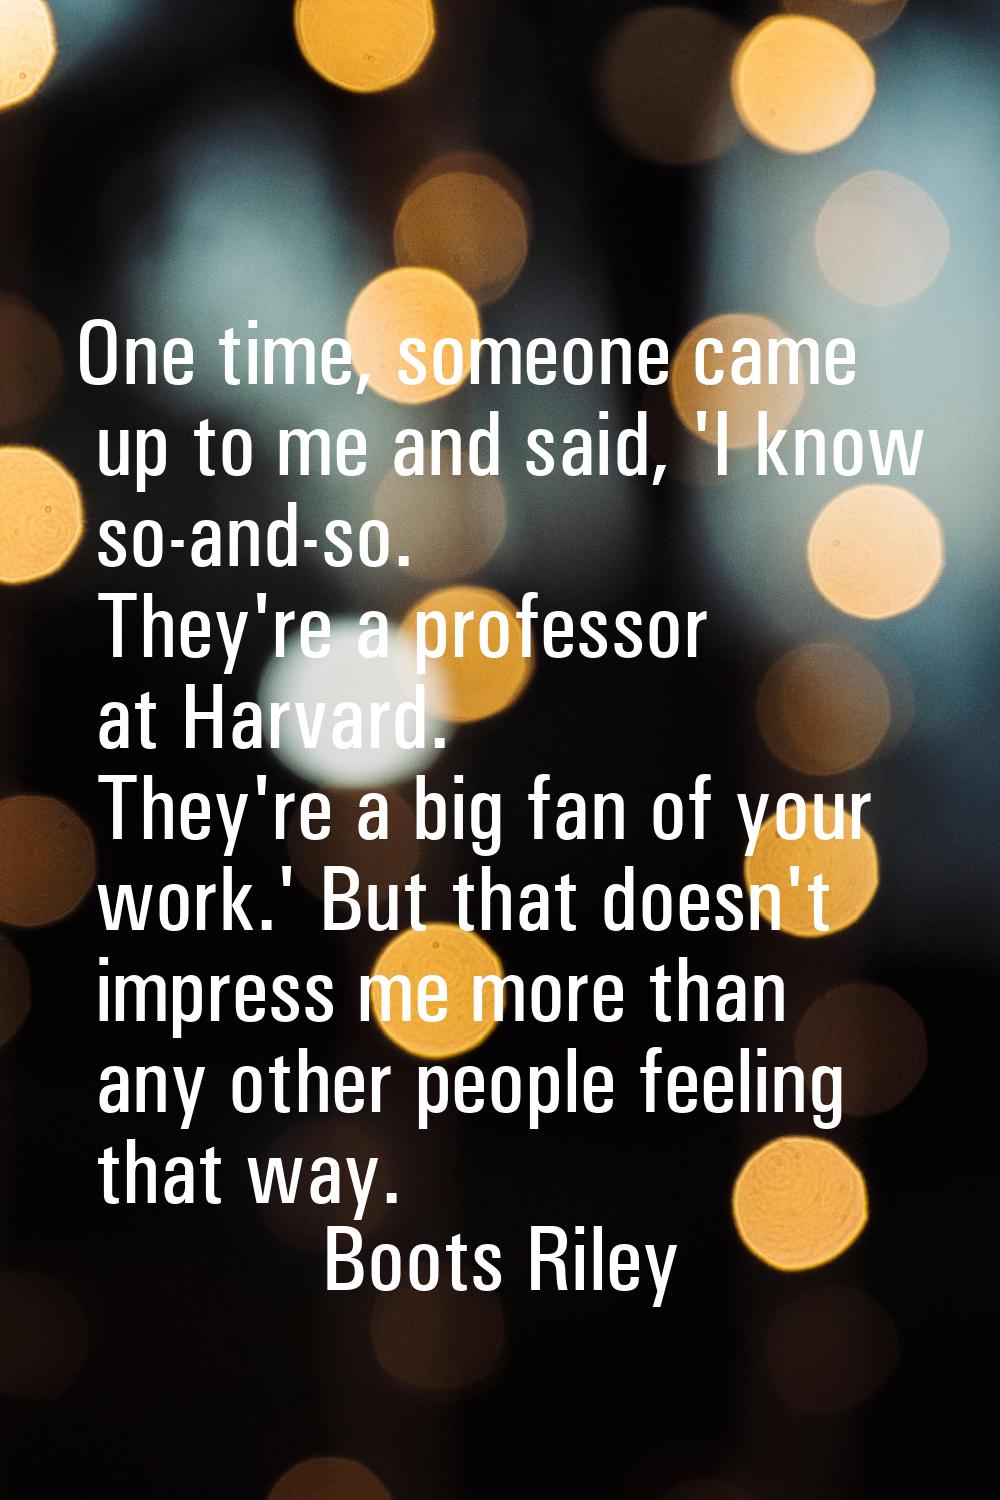 One time, someone came up to me and said, 'I know so-and-so. They're a professor at Harvard. They'r